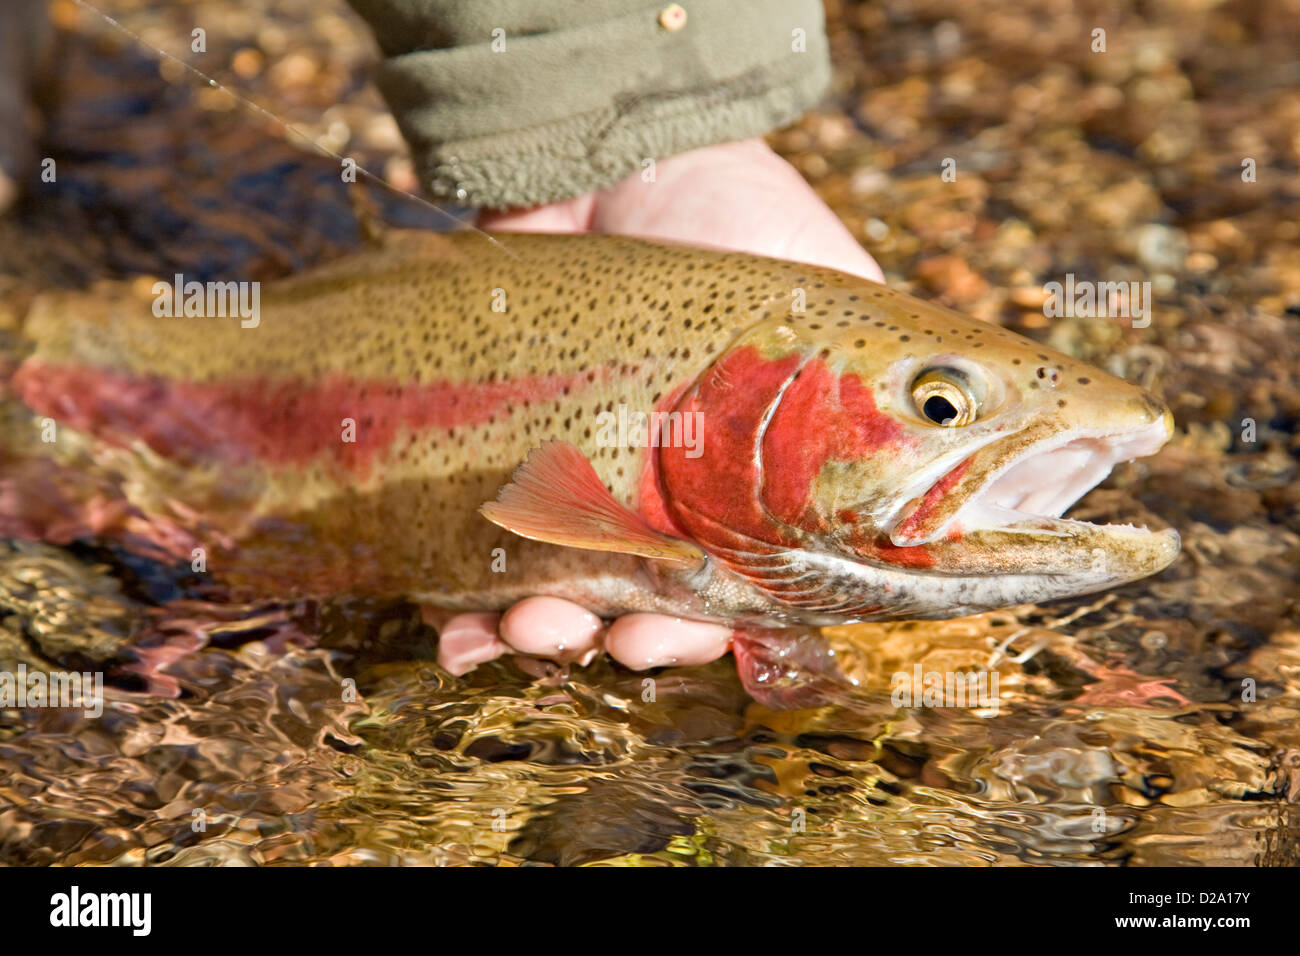 Hands of a fly fisherman releasing a spawning rainbow trout into the Colorado River near Lee's Ferry, Arizona Stock Photo